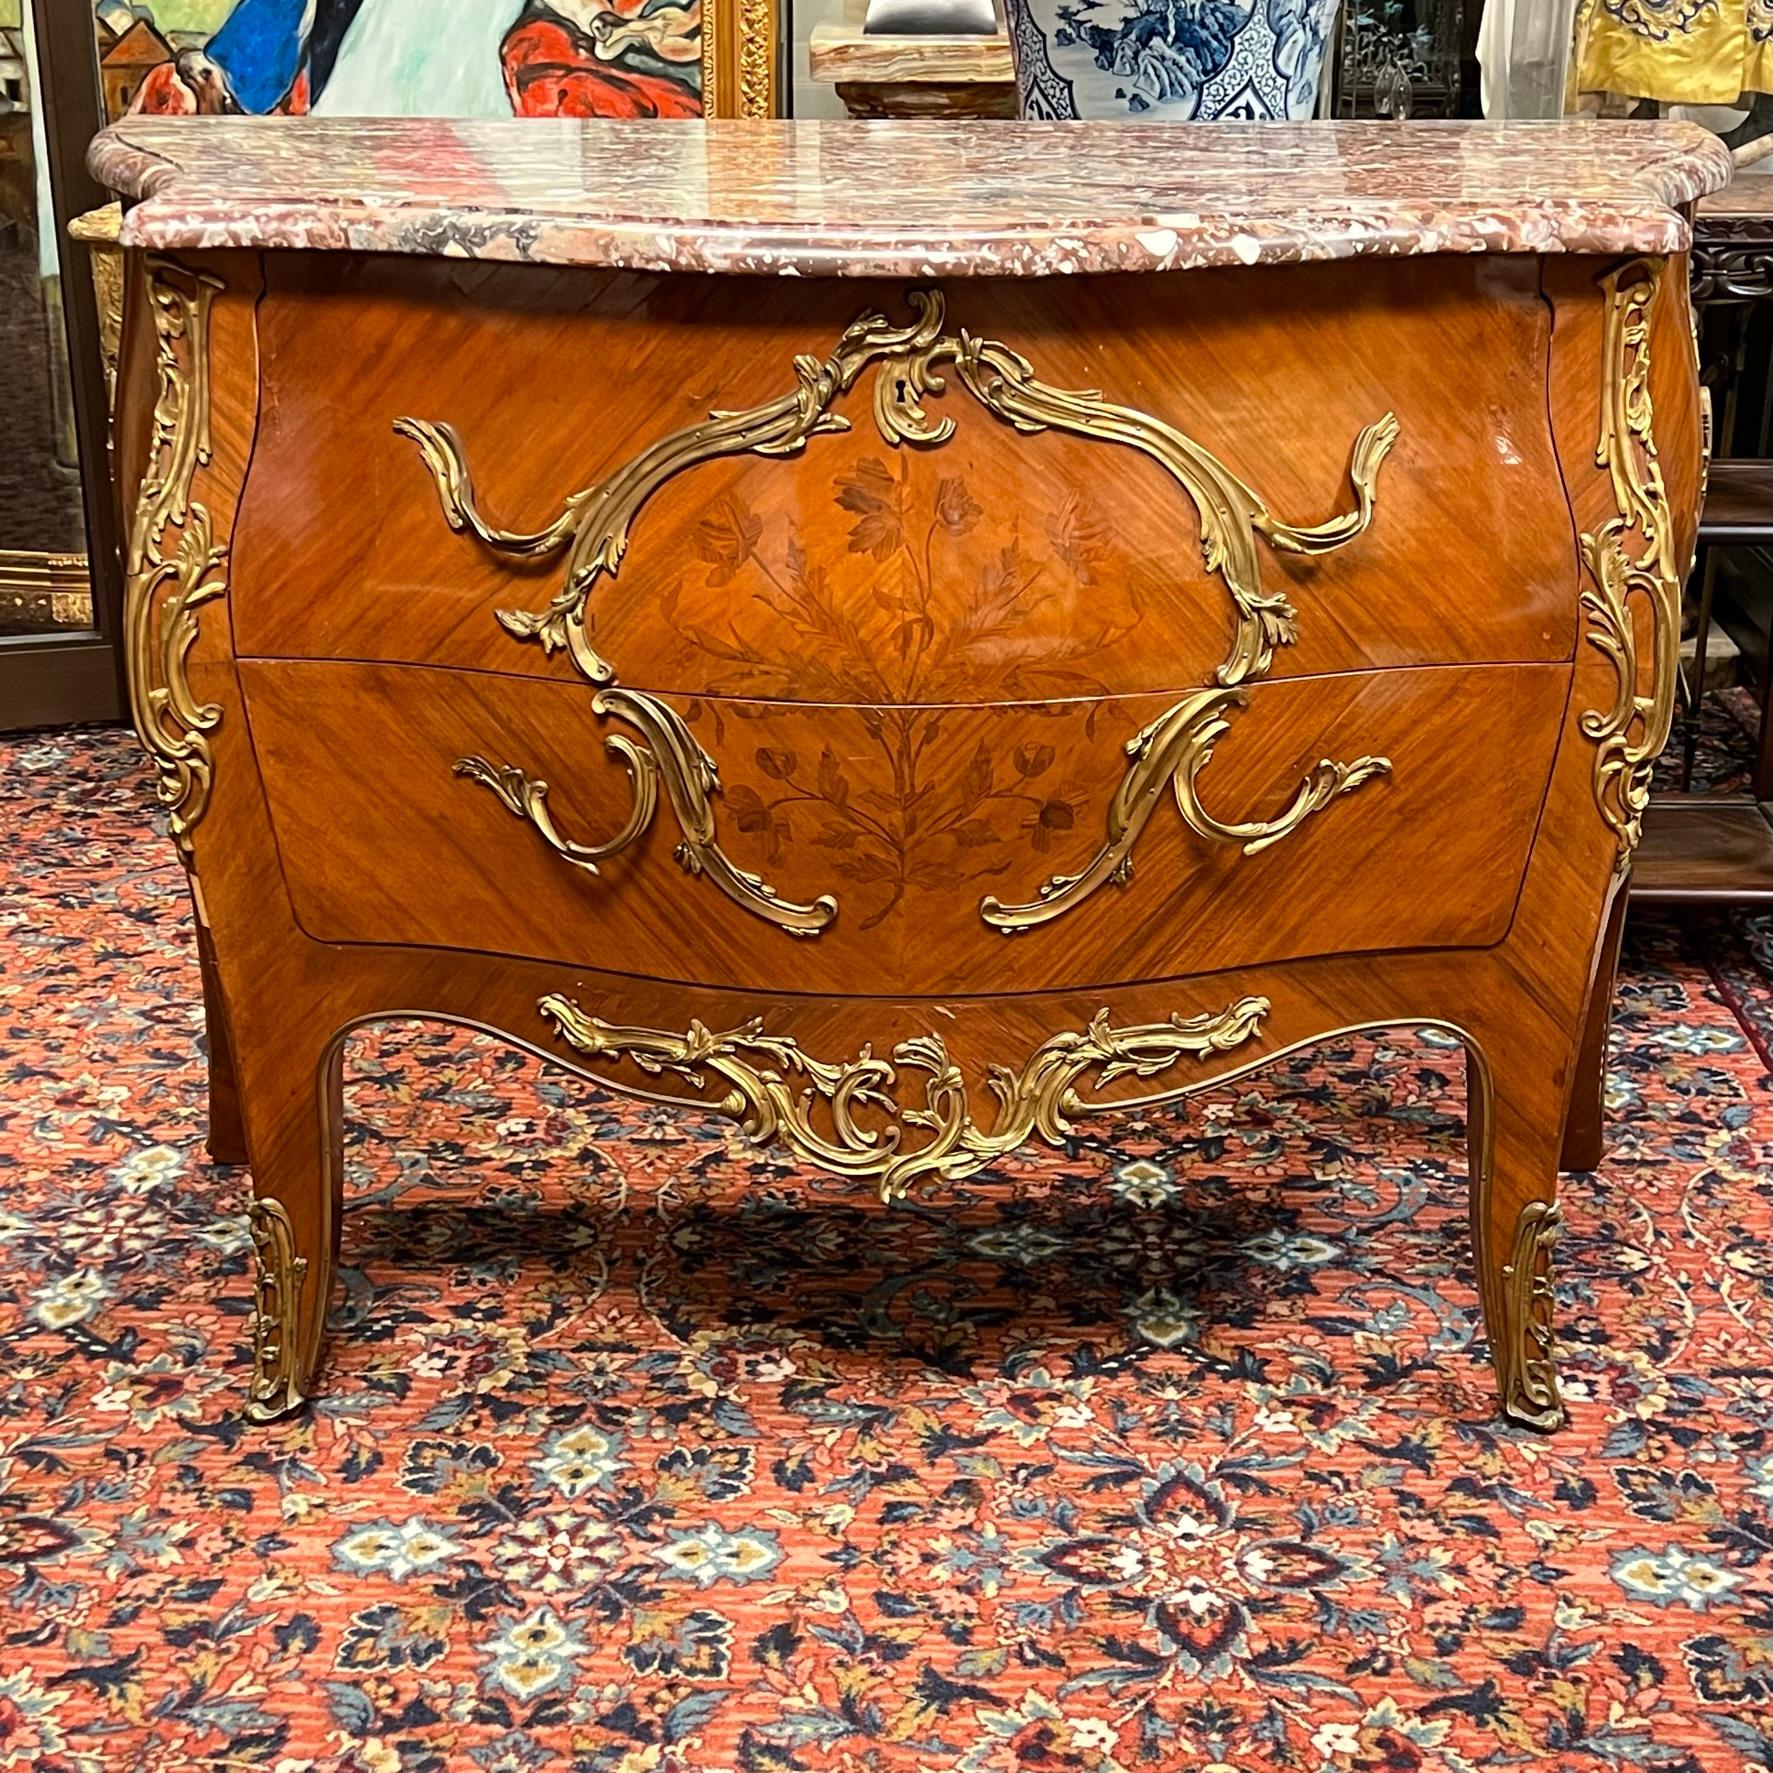 Bronze 19th Century Fruitwood and Marble Commode in Louis XV Style For Sale